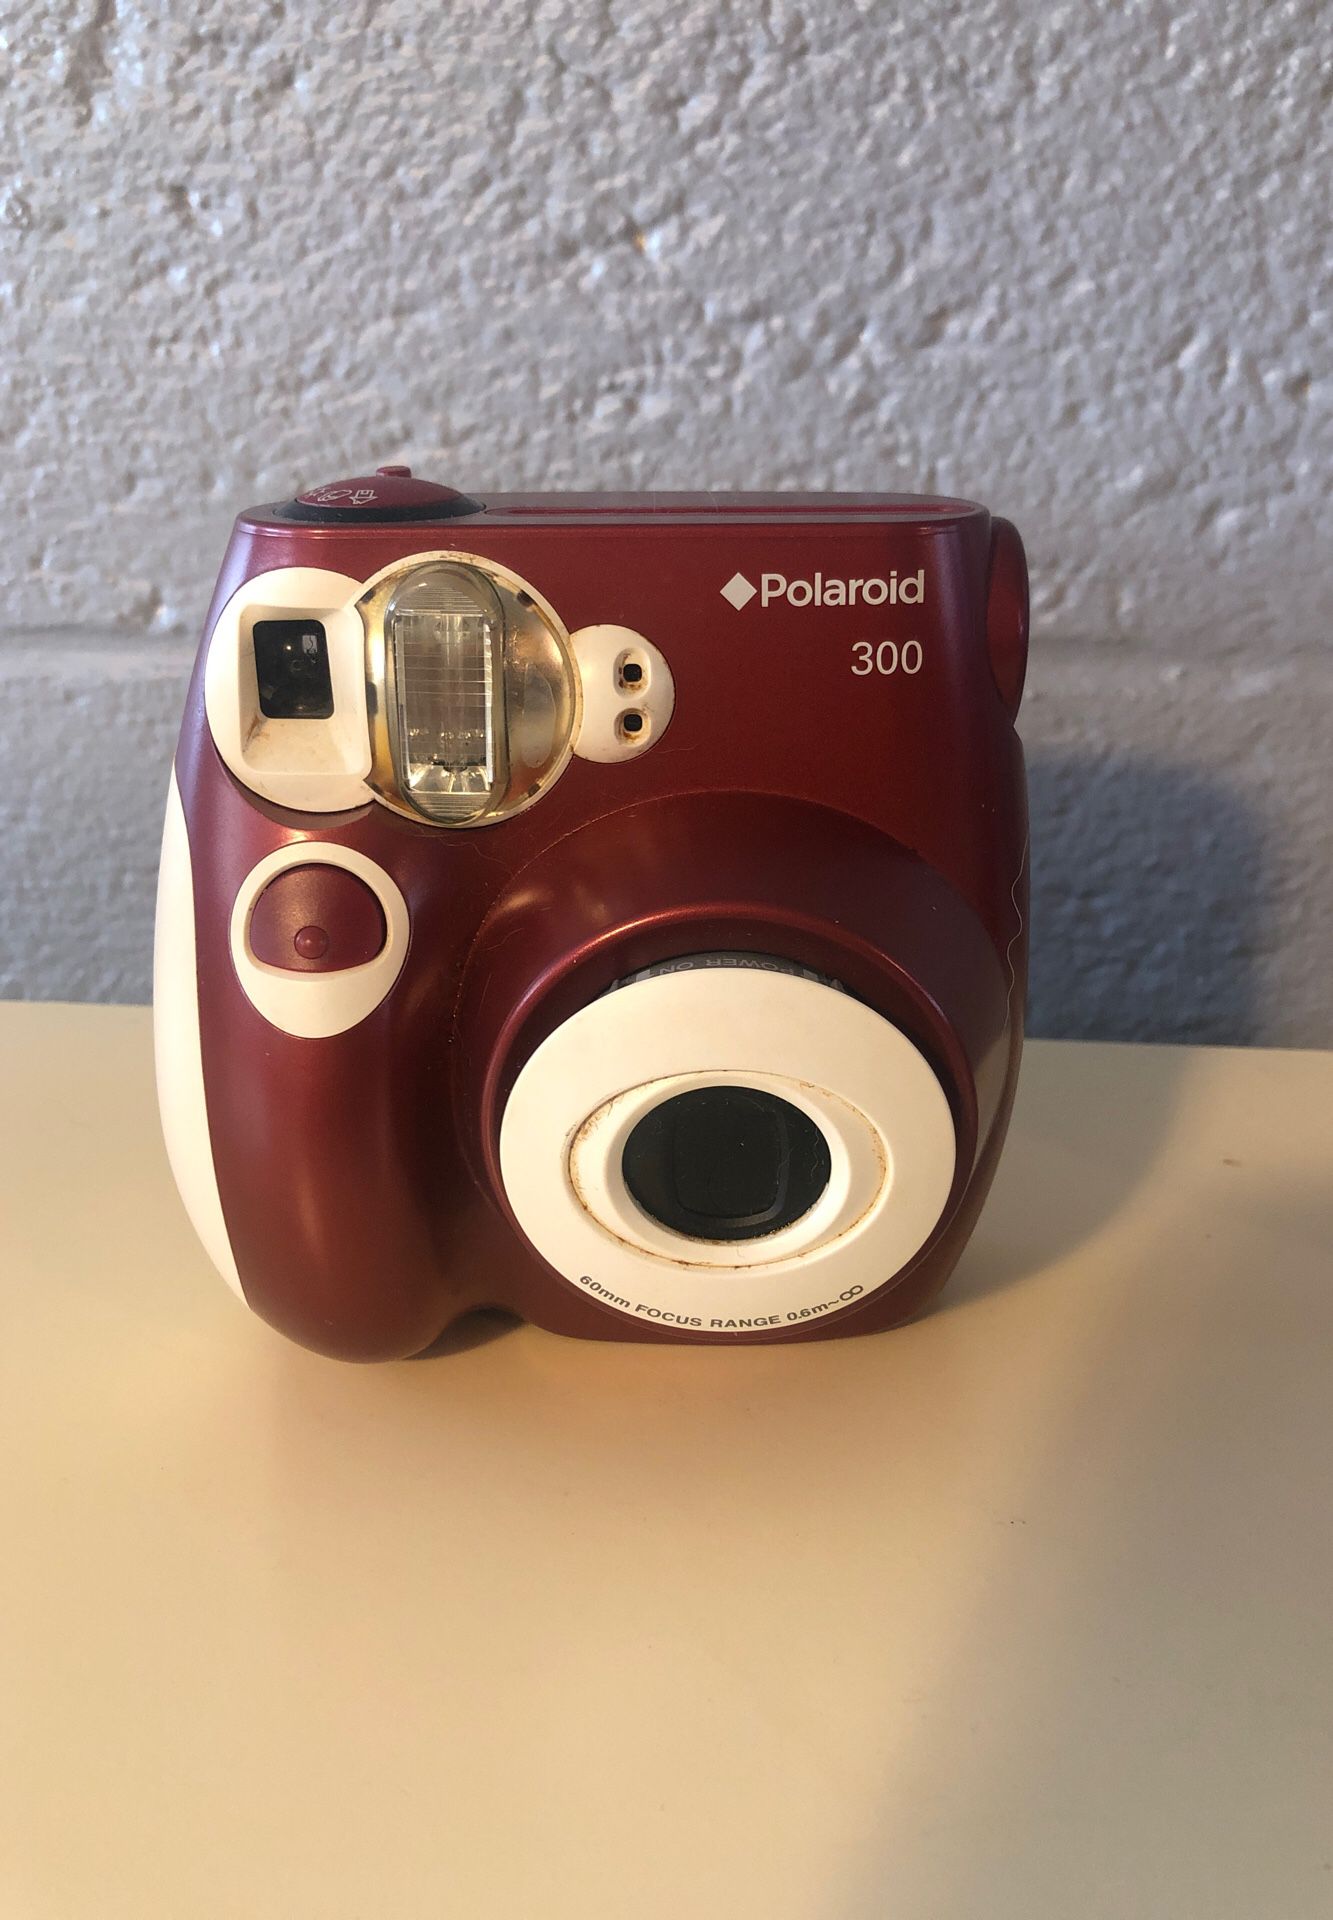 Poloroid 300 instant camera